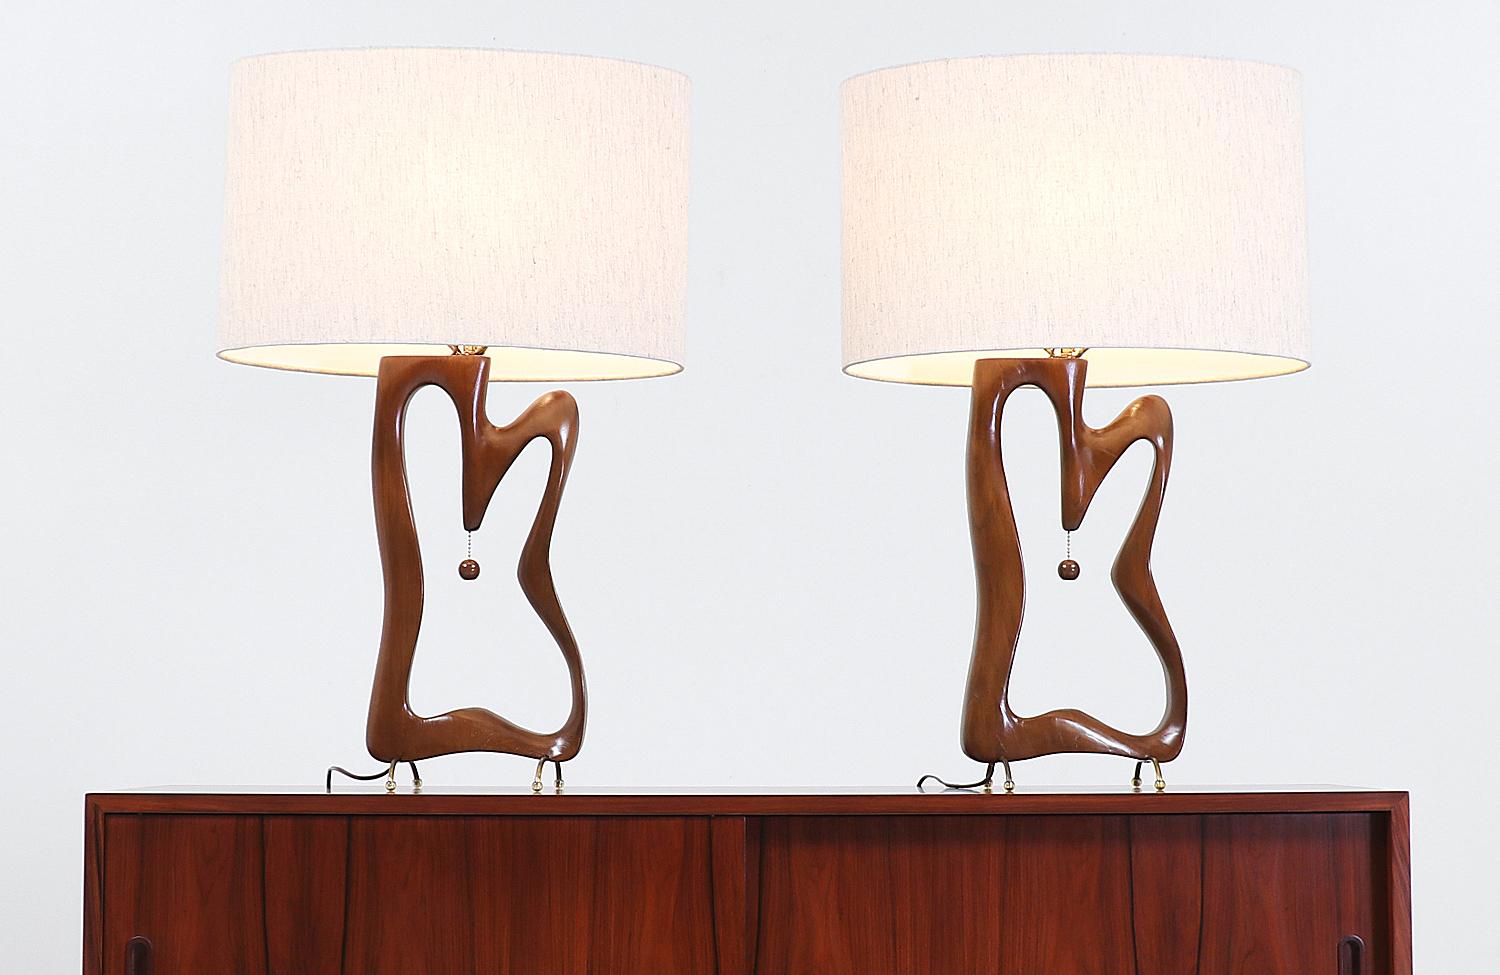 Mid-Century Modern biomorphic table lamps 


Dimensions:
32in H x 10in W x 7in D
Lamp shade: 13in H x 20.50in W x 10.50in D.